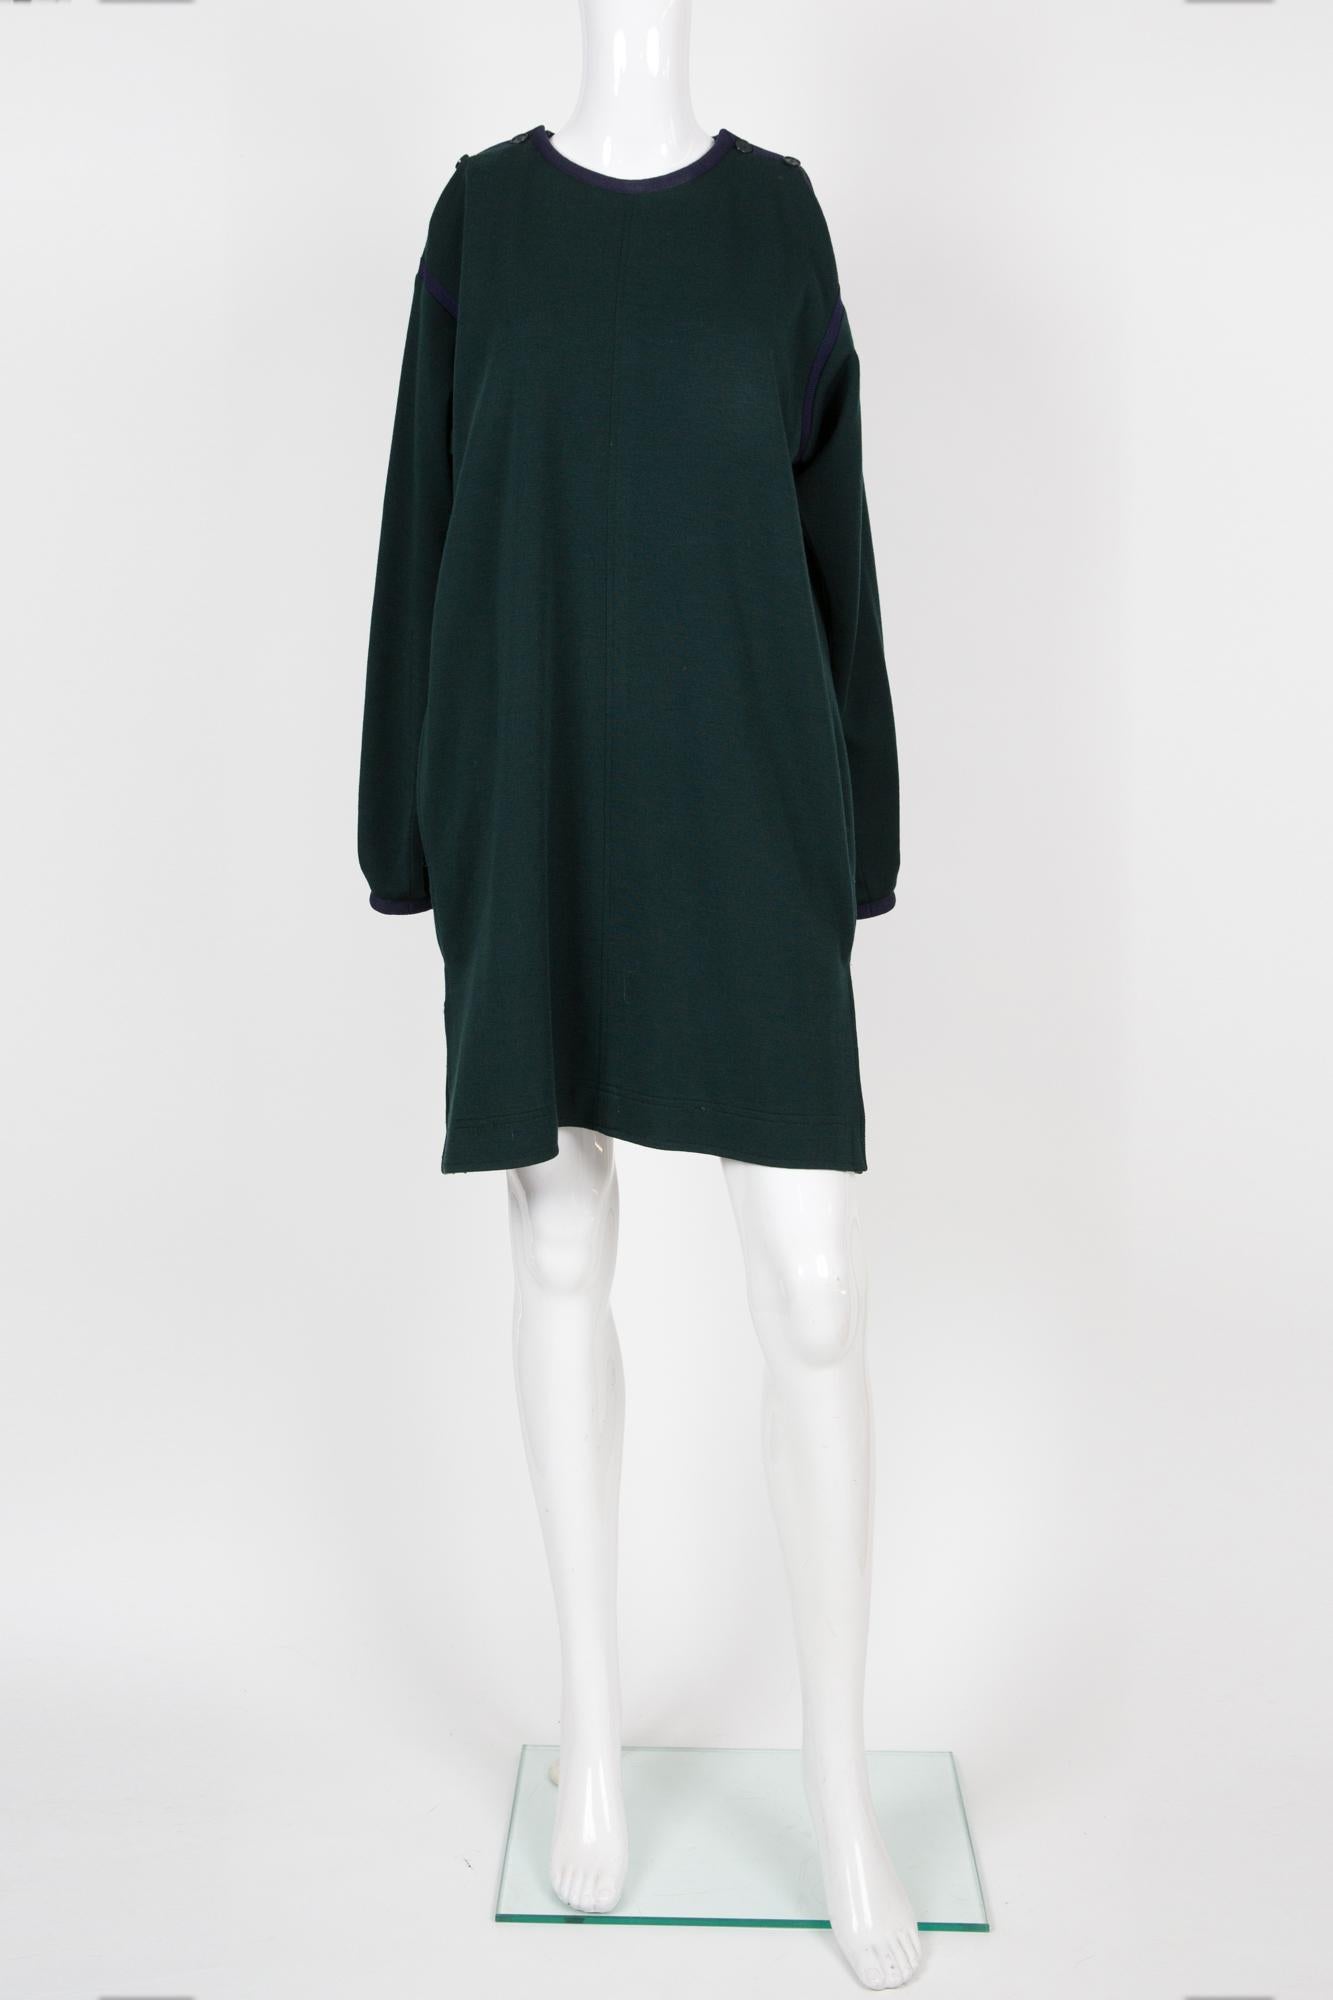 Yves Saint Laurent YSL green wool dress featuring a navy braided finishing at armholes, neck & cuffs, shoulder navy buttons, sides pockets and sides slits.
Circa 1970s
Composition: 100% wool
Estimated size 40fr/US8/UK12
Made in France. 
In good